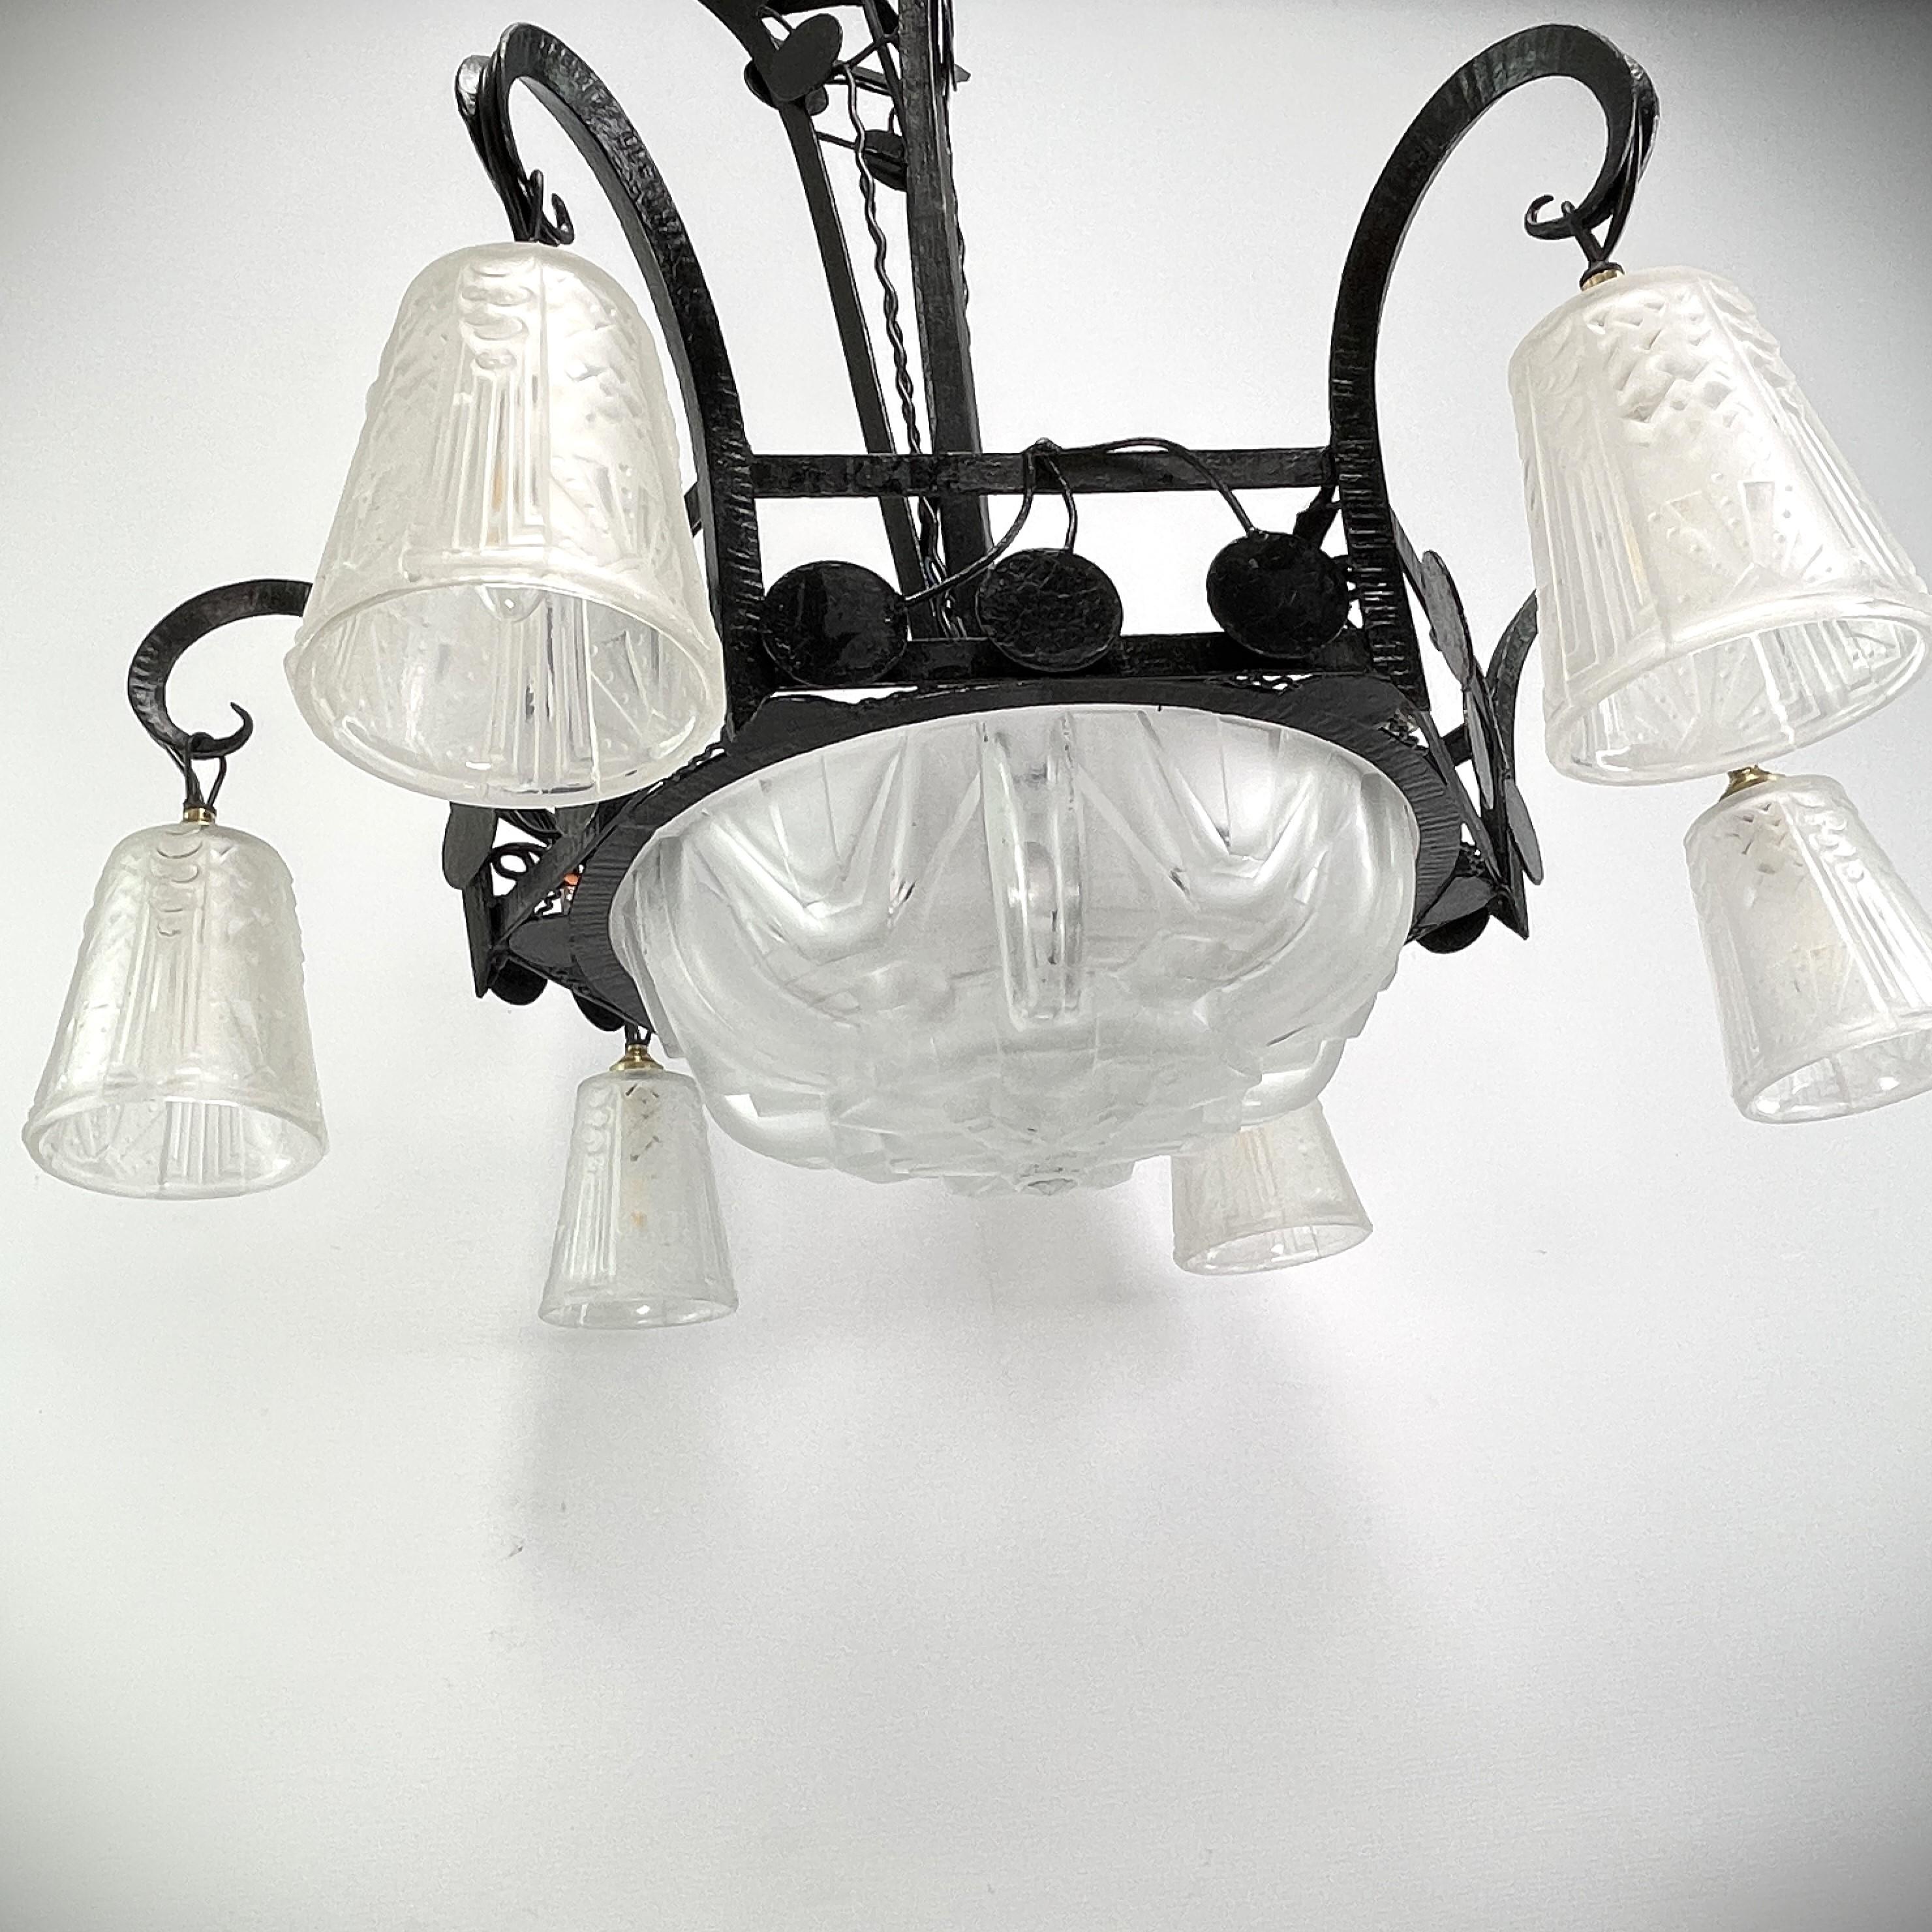 Mid-20th Century Art Deco wrought iron Ceiling Lamp by Muller Freres, Luneville, 1930s For Sale